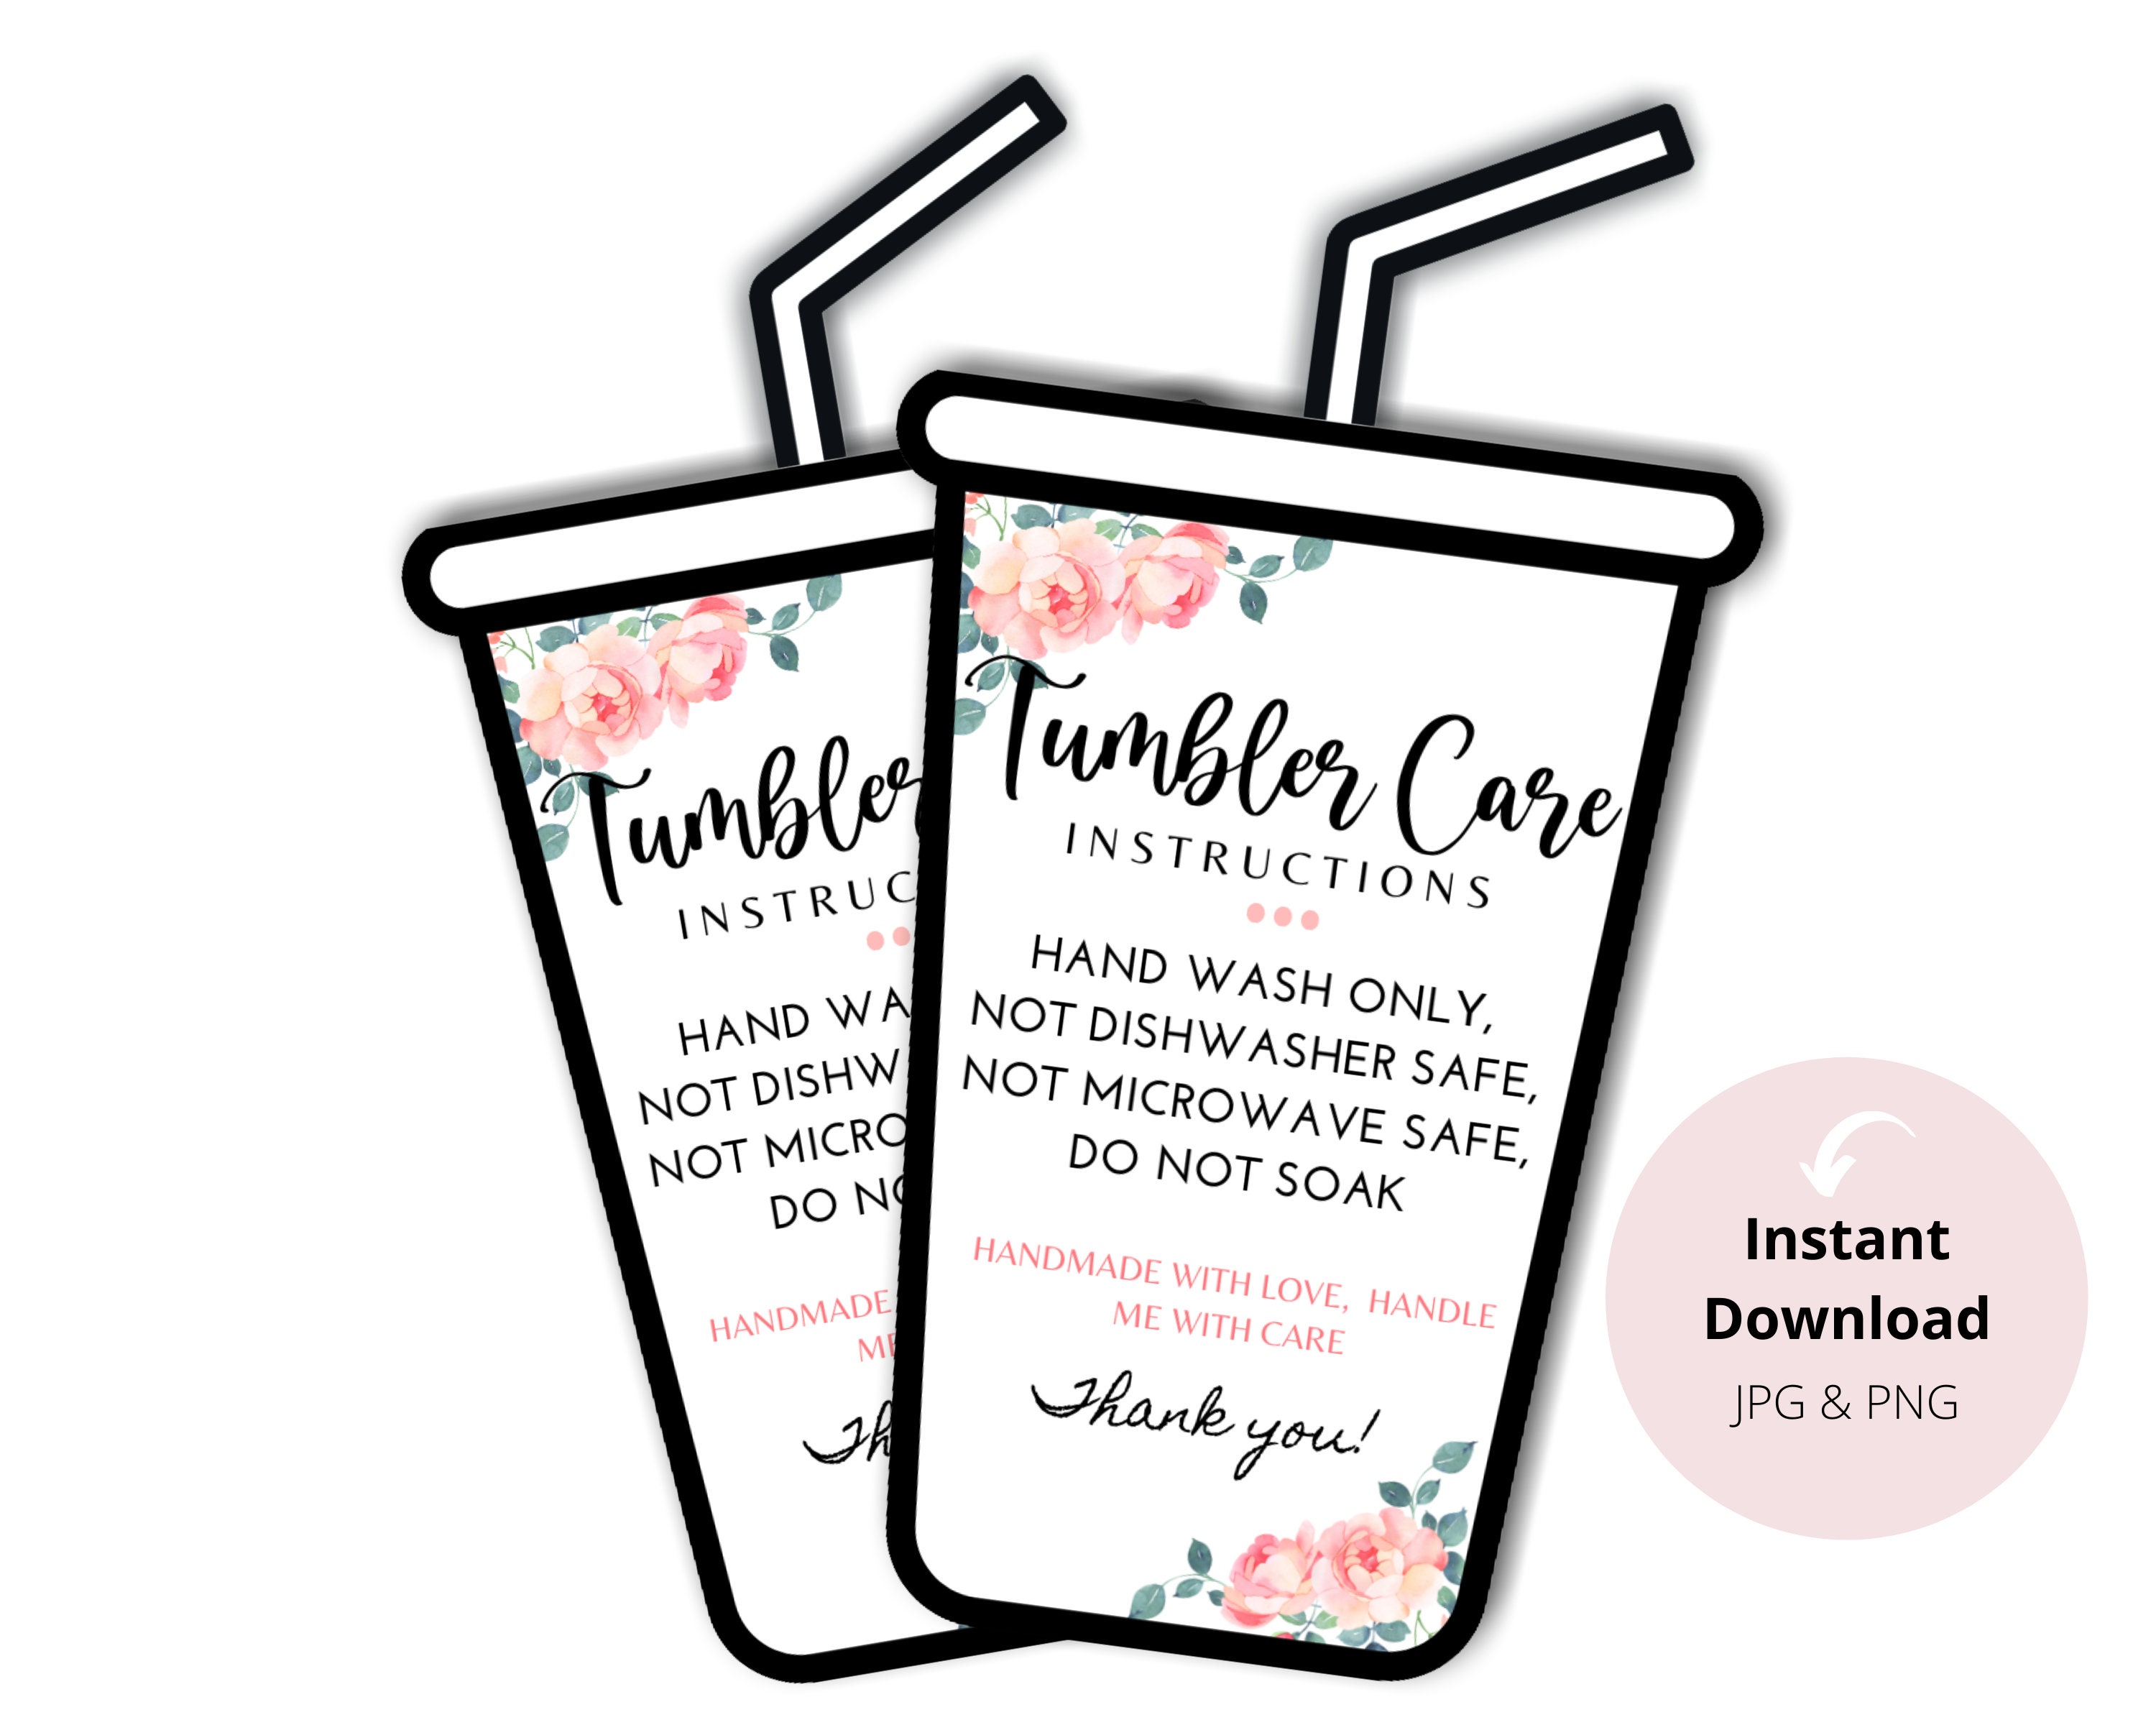 50 Care Instruction Cards Tumbler, Care Instructions for Tumbler Insert for  Small Business, Care Instruction Cards for Cups, Small Online Shop Package